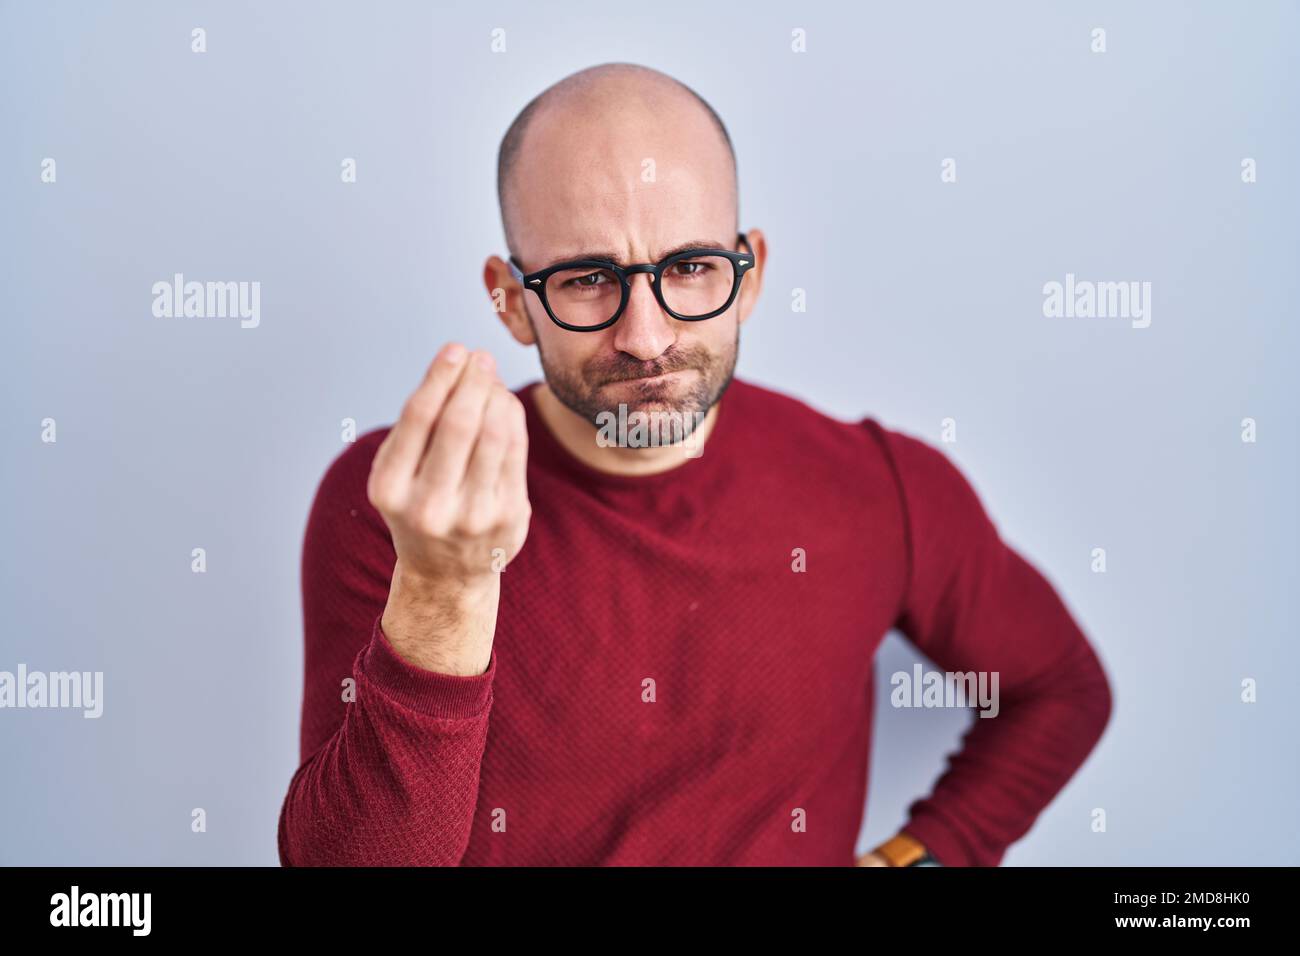 Young bald man with beard standing over white background wearing glasses doing italian gesture with hand and fingers confident expression Stock Photo